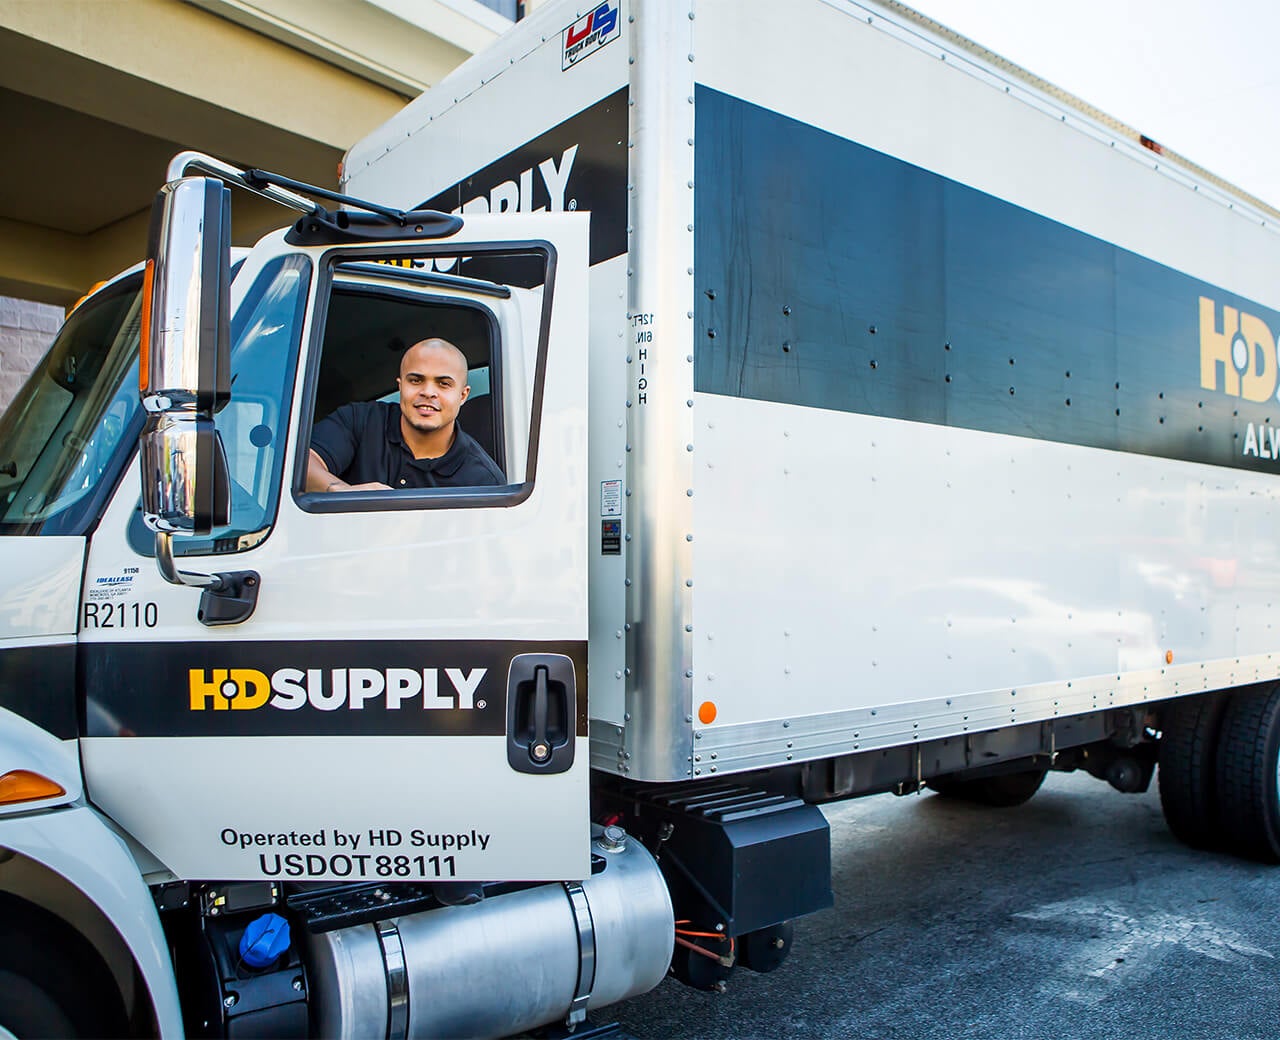 Parked HD Supply truck with a smiling driver inside